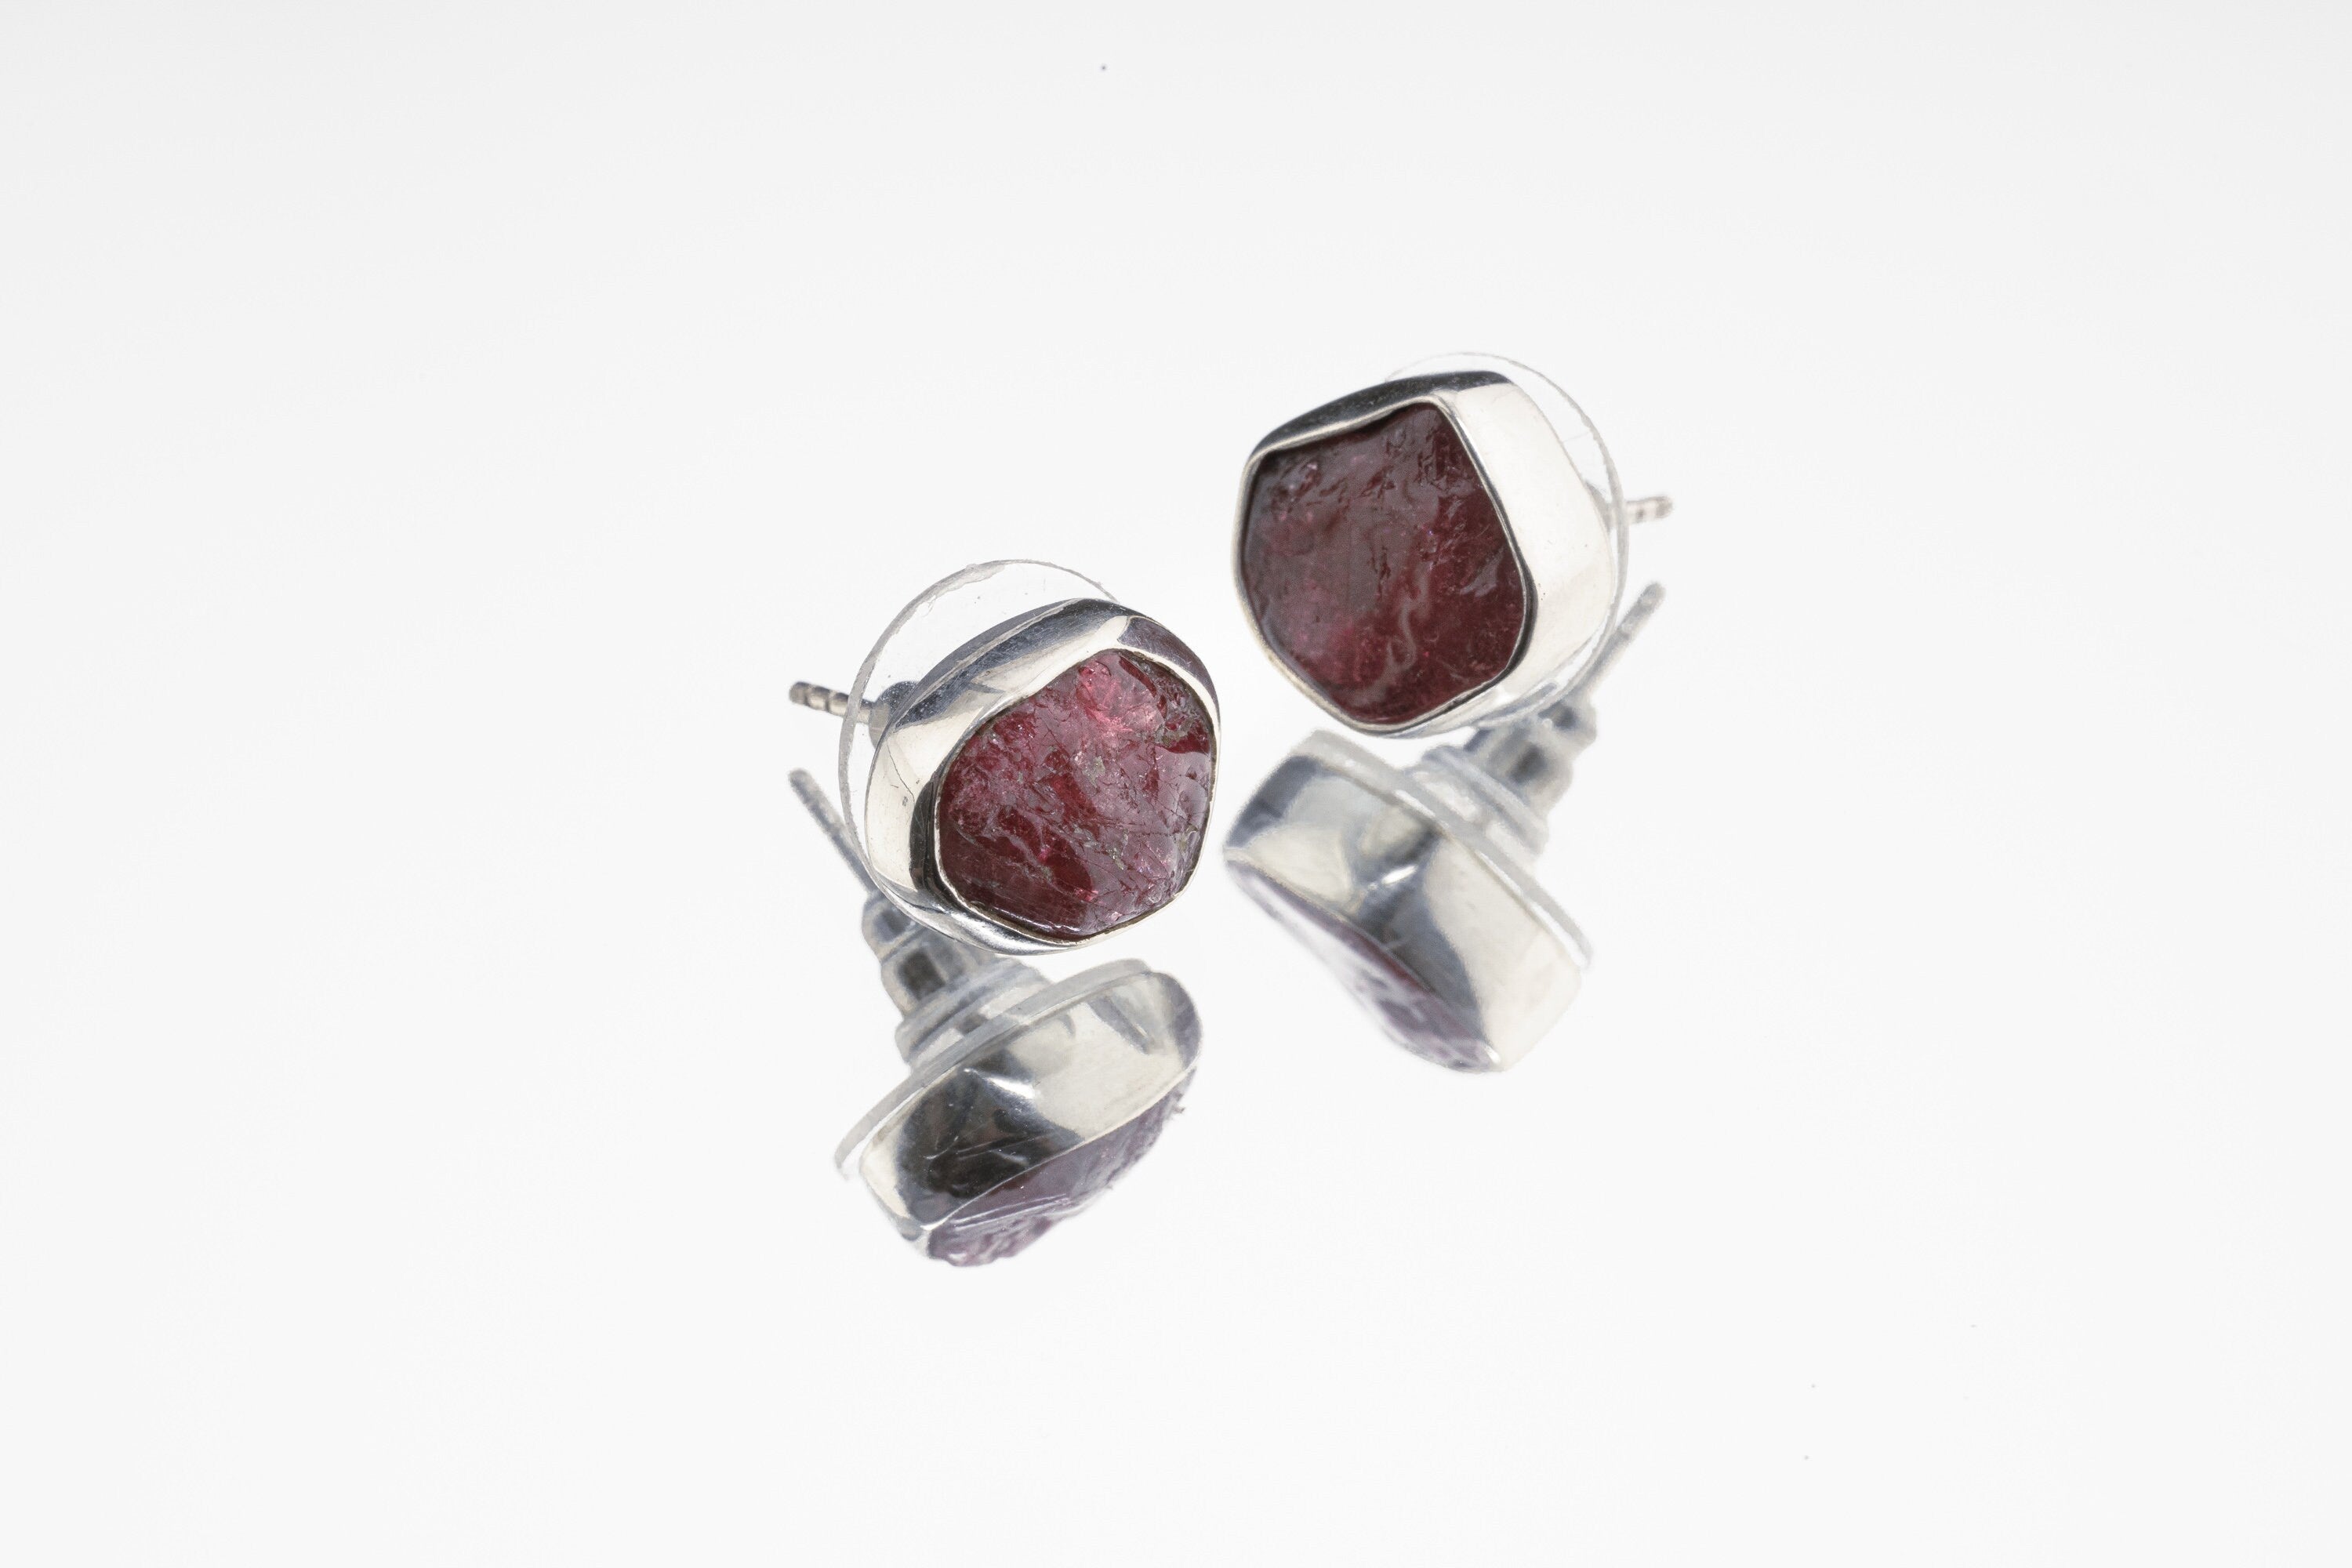 Rubellite Pink Tourmaline - Pick your organic shaped Pair - Sterling Silver - Polished Finish - Freeform Earring Studs